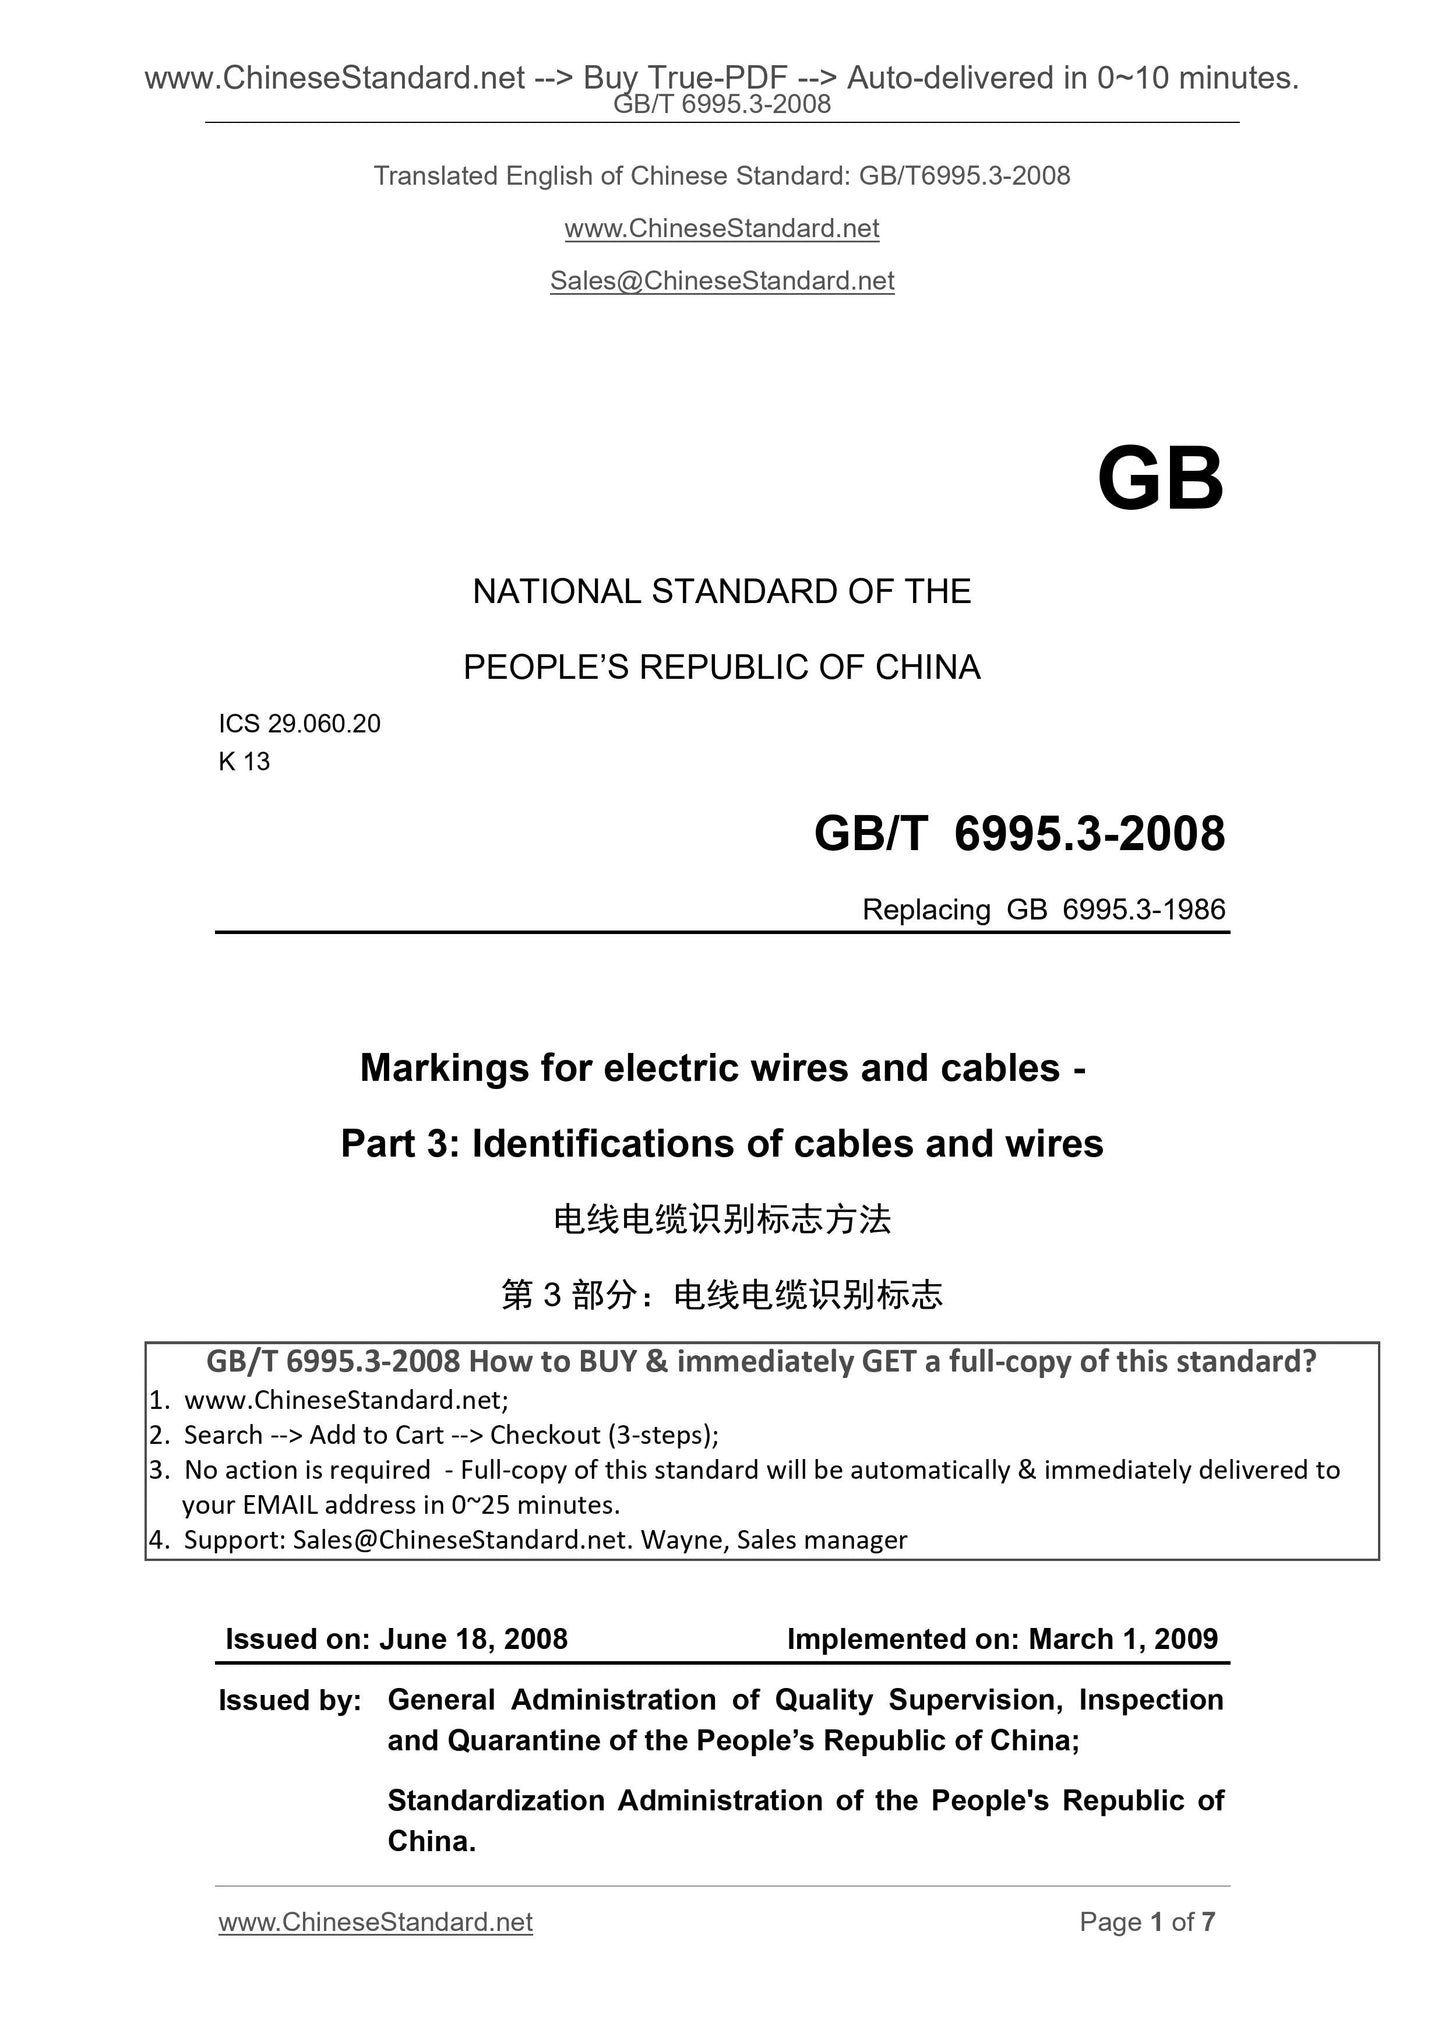 GB/T 6995.3-2008 Page 1